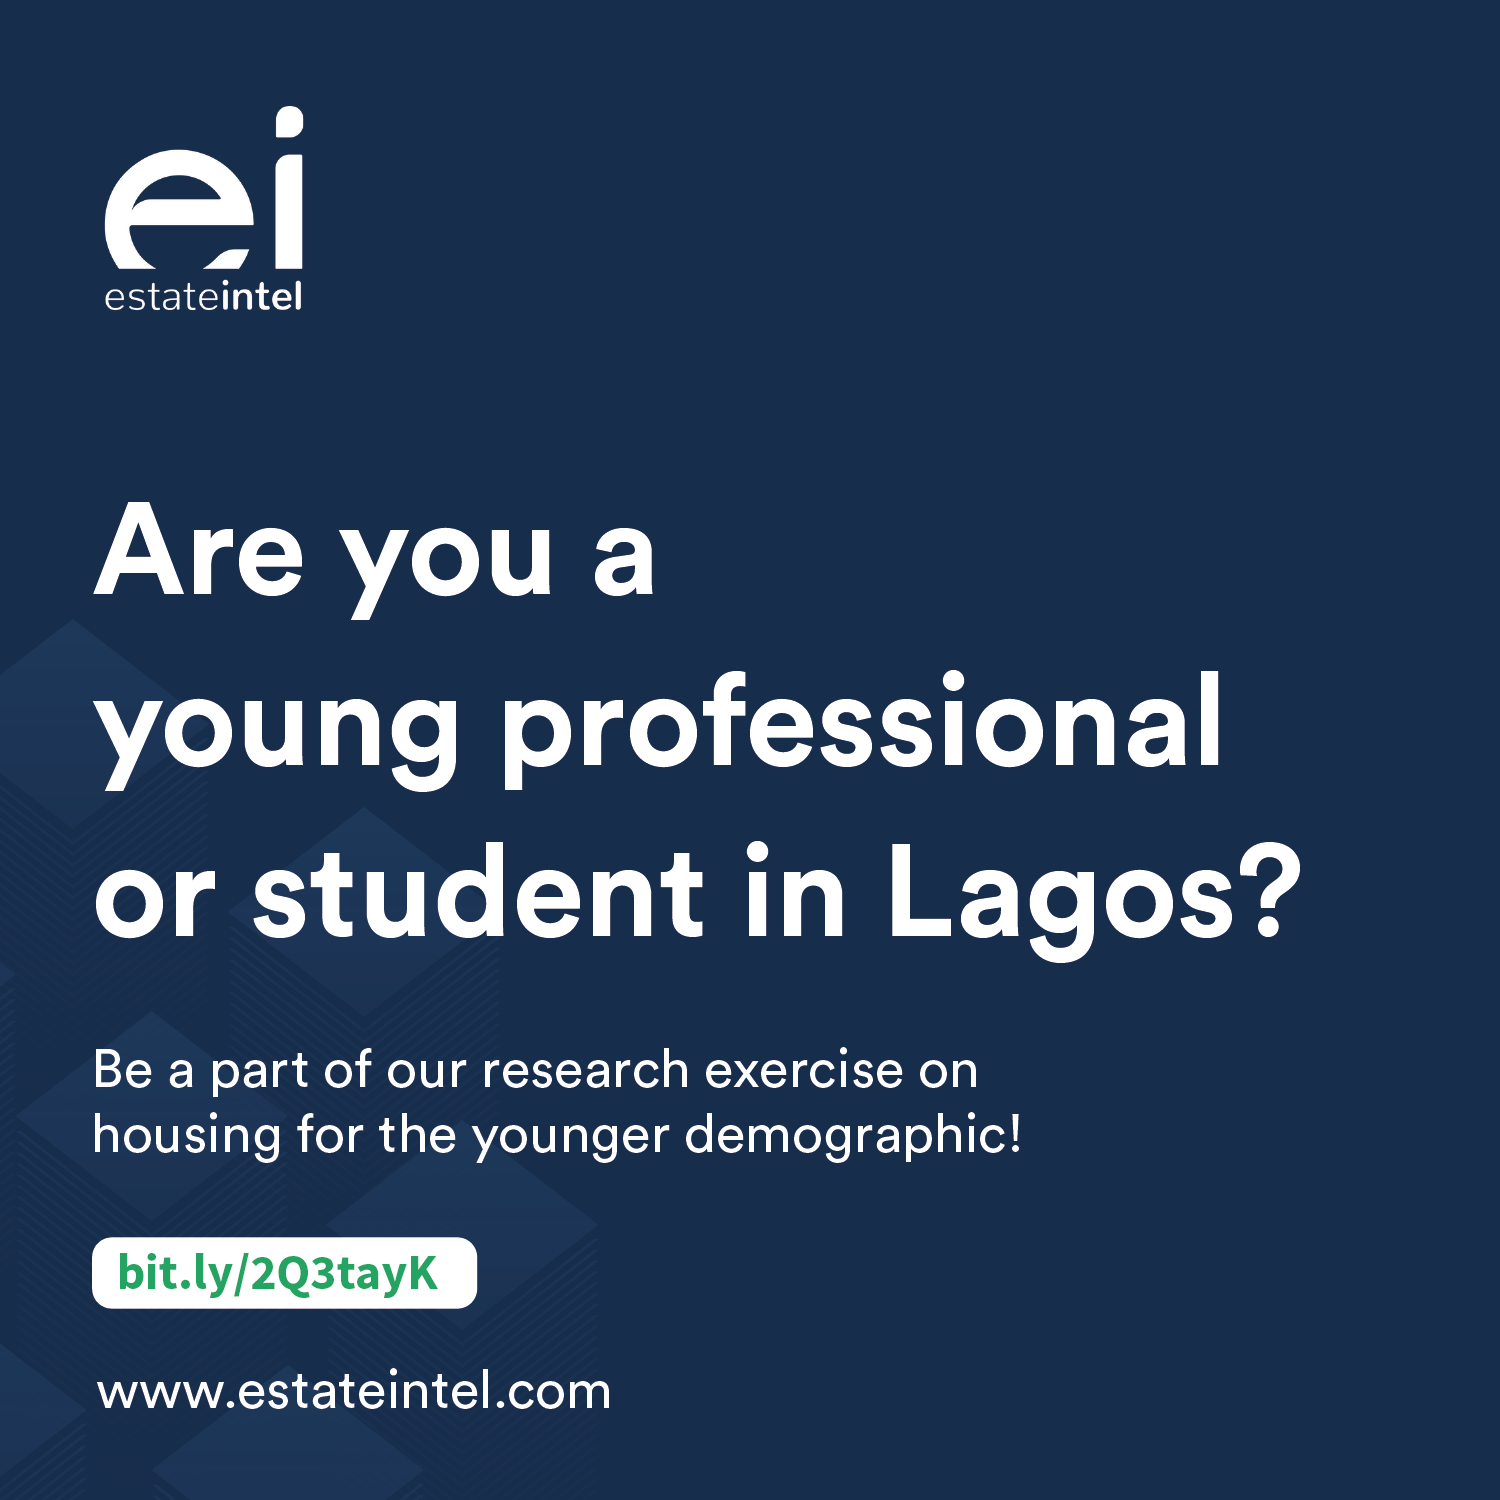 Be a part of our research exercise on Housing for the Young Demographic.